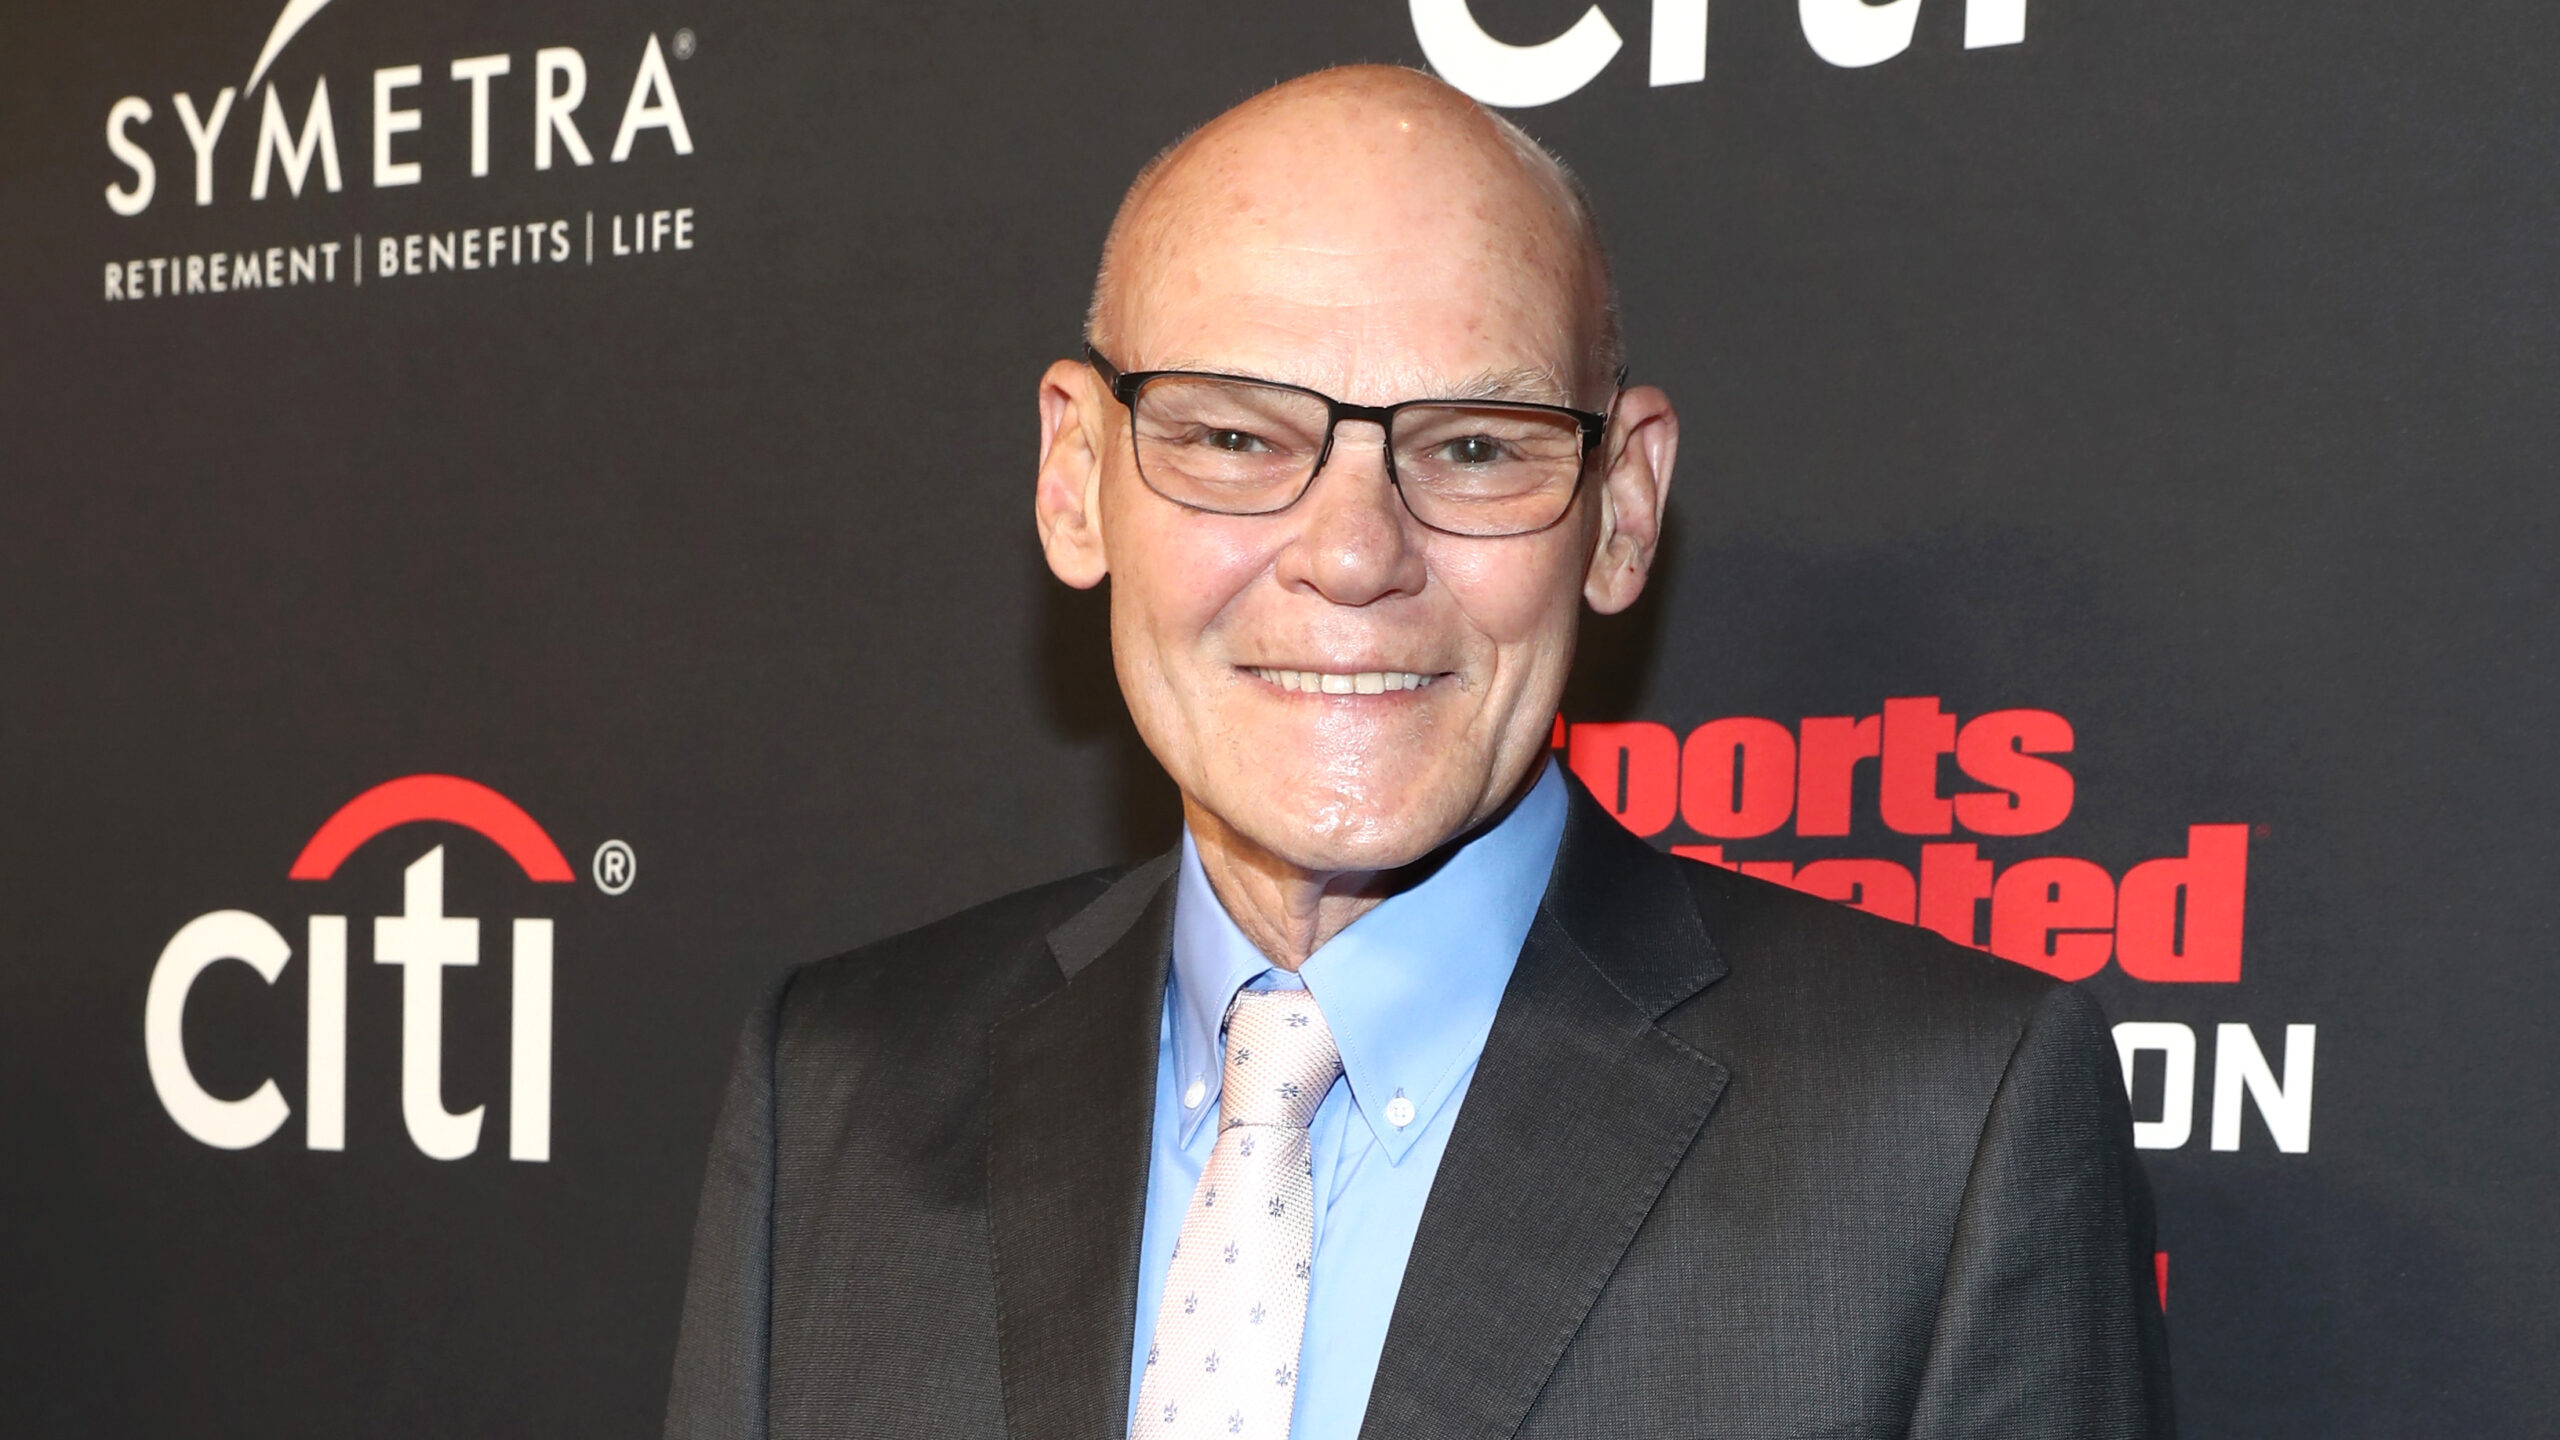 James Carville, a Democratic strategist, raises concerns over his party’s messaging, calling it questionable